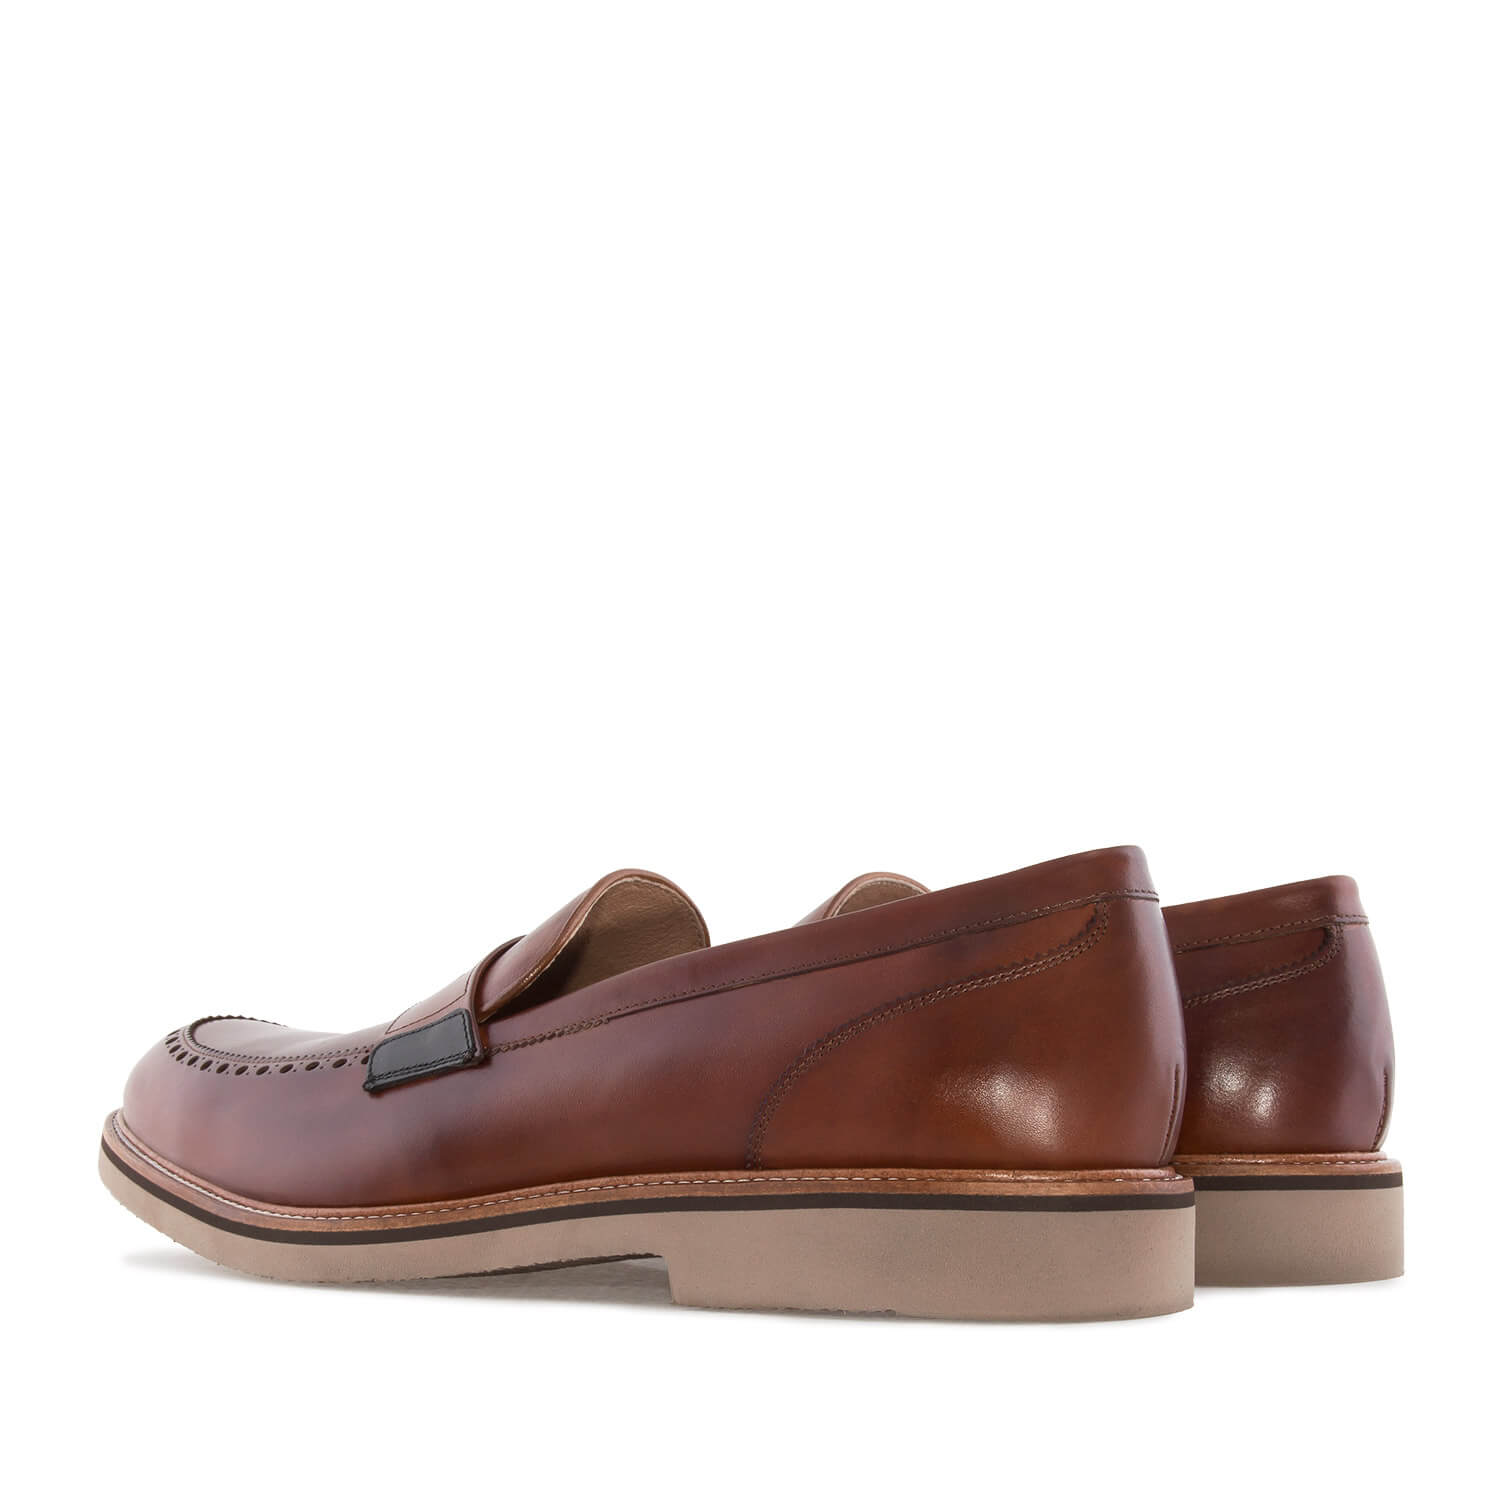 Men's Moccasins in Mahogany coloured Leather 